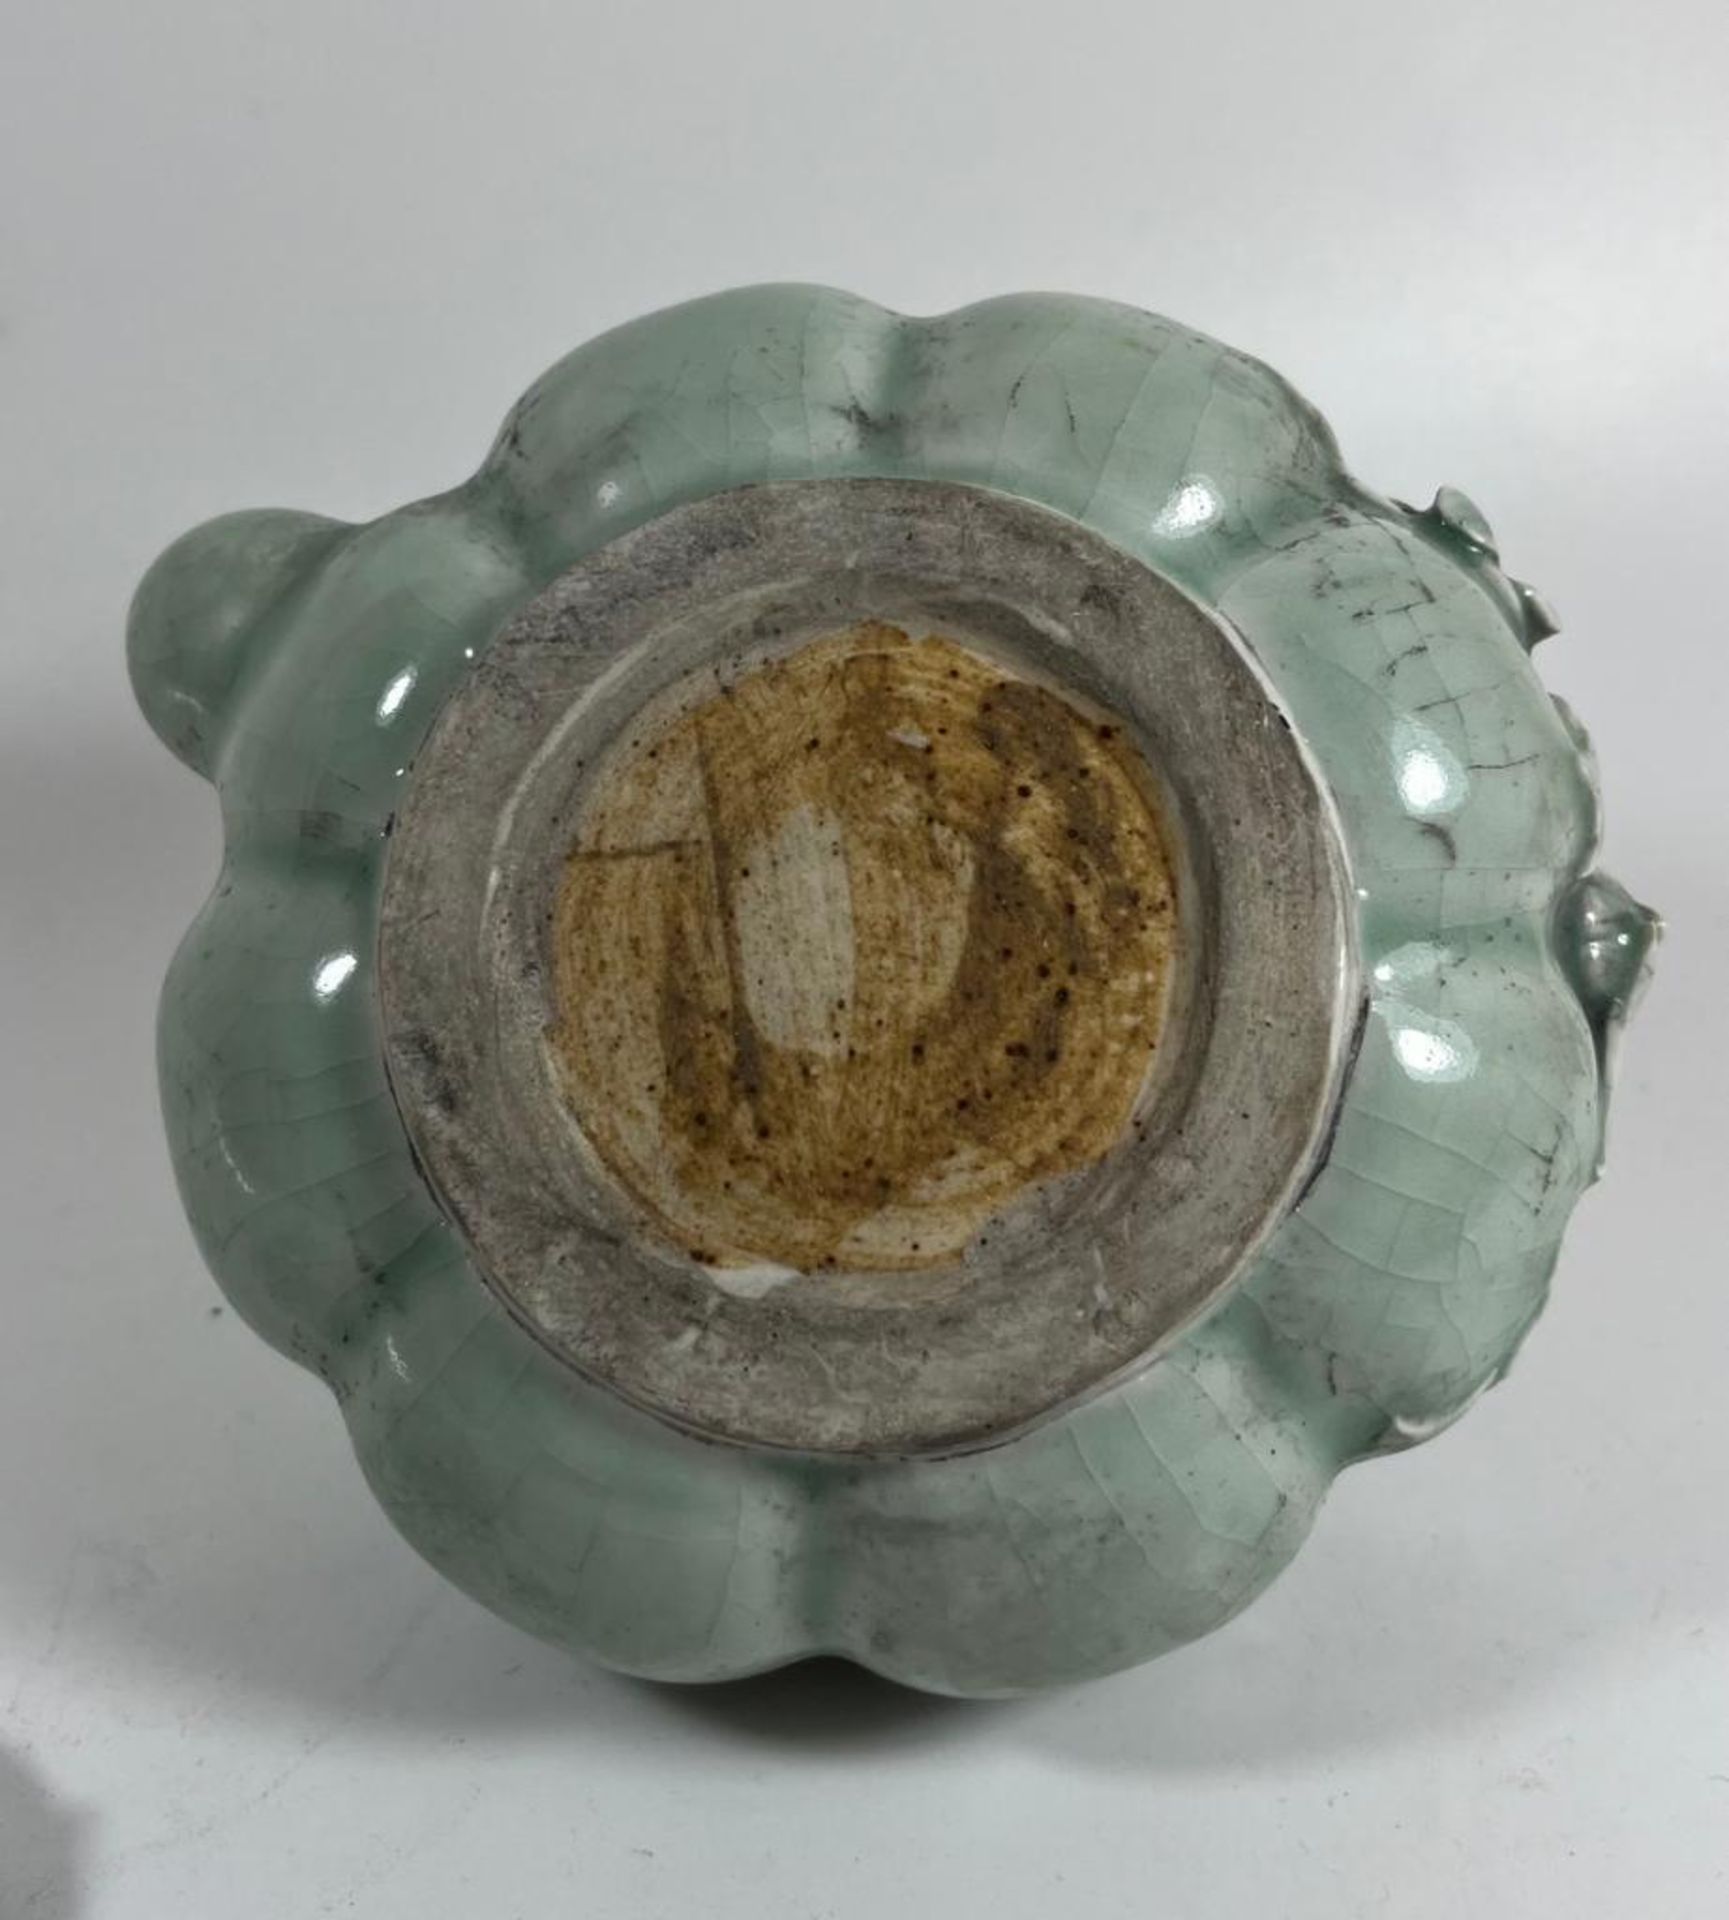 A CHINESE CELADON GLAZE TEAPOT WITH BRAIDED DESIGN HANDLE, HEIGHT 11 CM - Image 4 of 6